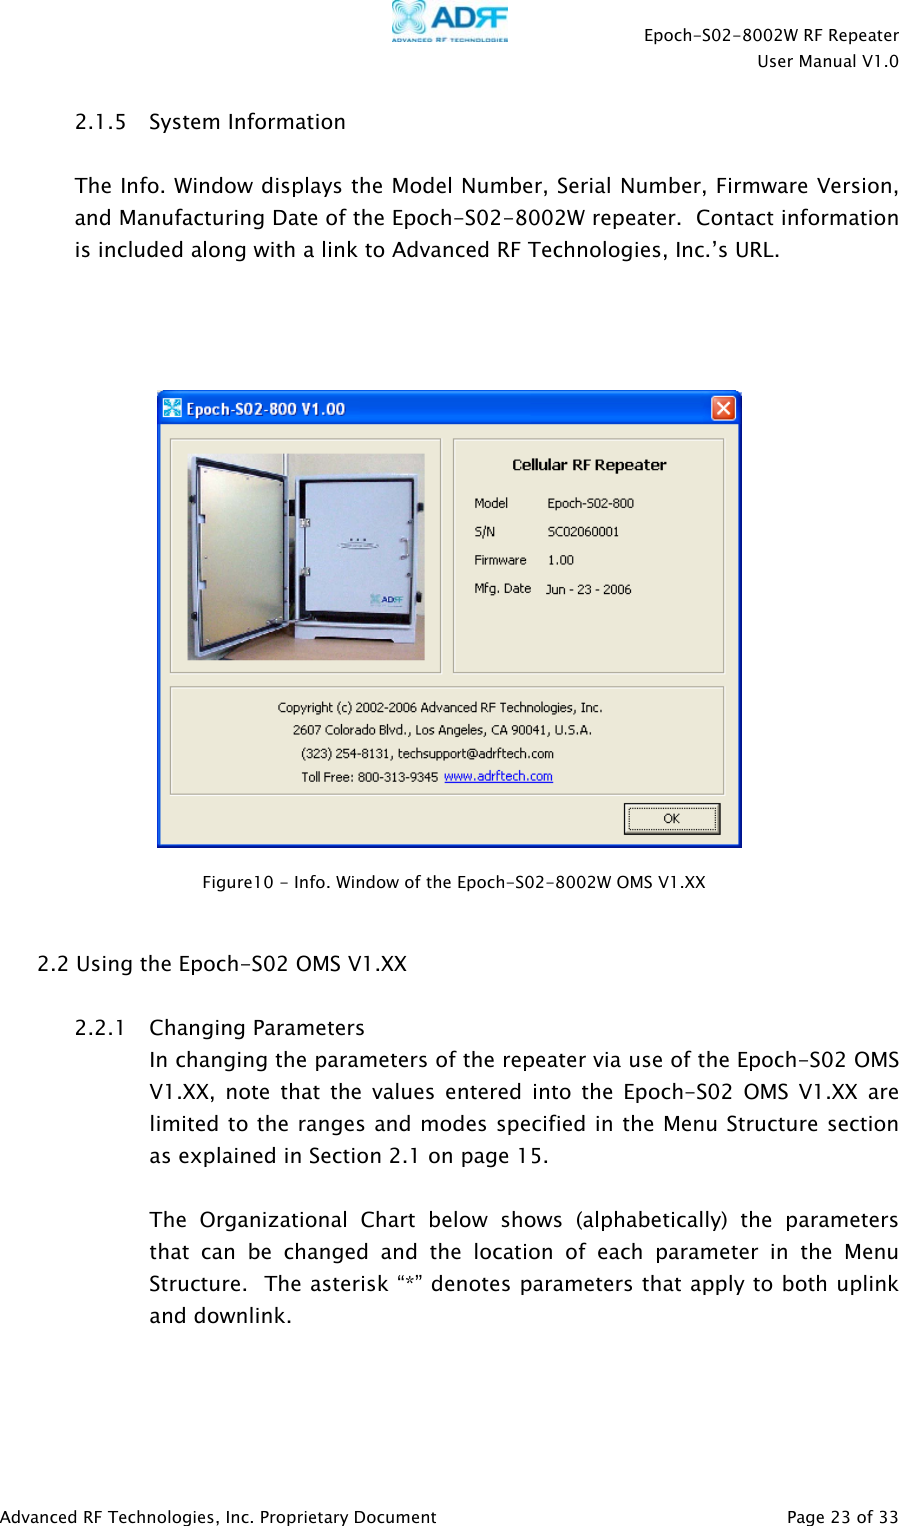    Epoch-S02-8002W RF Repeater  User Manual V1.0  Advanced RF Technologies, Inc. Proprietary Document   Page 23 of 33  2.1.5 System Information  The Info. Window displays the Model Number, Serial Number, Firmware Version, and Manufacturing Date of the Epoch-S02-8002W repeater.  Contact information is included along with a link to Advanced RF Technologies, Inc.’s URL.         2.2 Using the Epoch-S02 OMS V1.XX  2.2.1 Changing Parameters In changing the parameters of the repeater via use of the Epoch-S02 OMS V1.XX, note that the values entered into the Epoch-S02 OMS V1.XX are limited to the ranges and modes specified in the Menu Structure section as explained in Section 2.1 on page 15.  The Organizational Chart below shows (alphabetically) the parameters that can be changed and the location of each parameter in the Menu Structure.  The asterisk “*” denotes parameters that apply to both uplink and downlink.    Figure10 - Info. Window of the Epoch-S02-8002W OMS V1.XX 